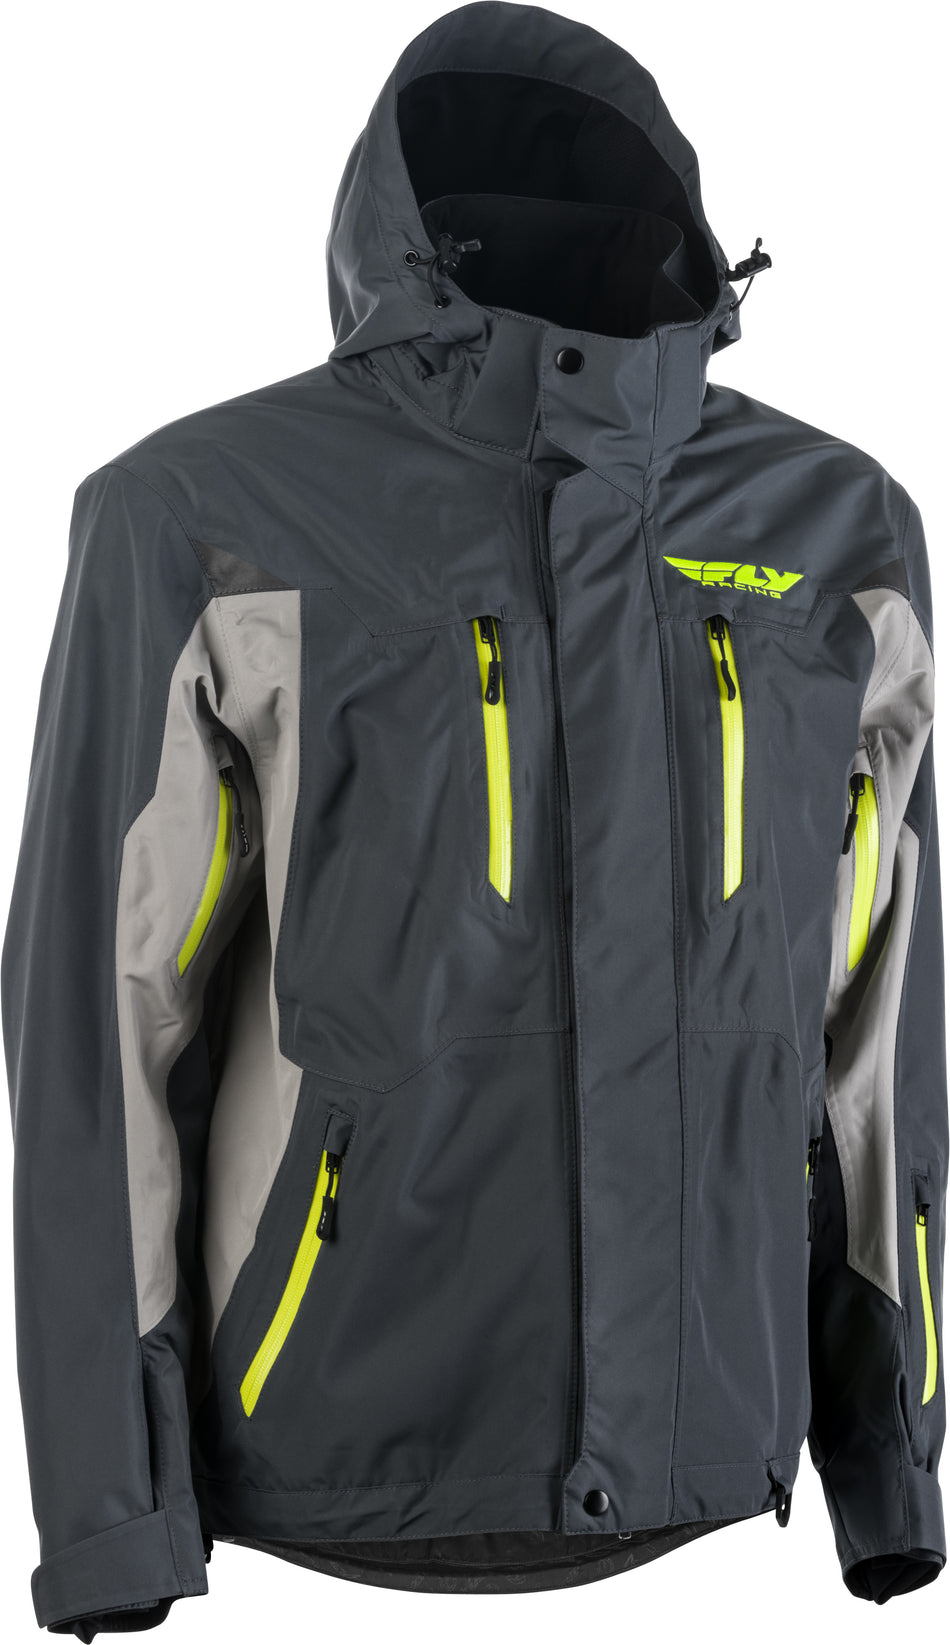 FLY RACING Fly Incline Jacket Grey/Charcoal 2x 470-41012X